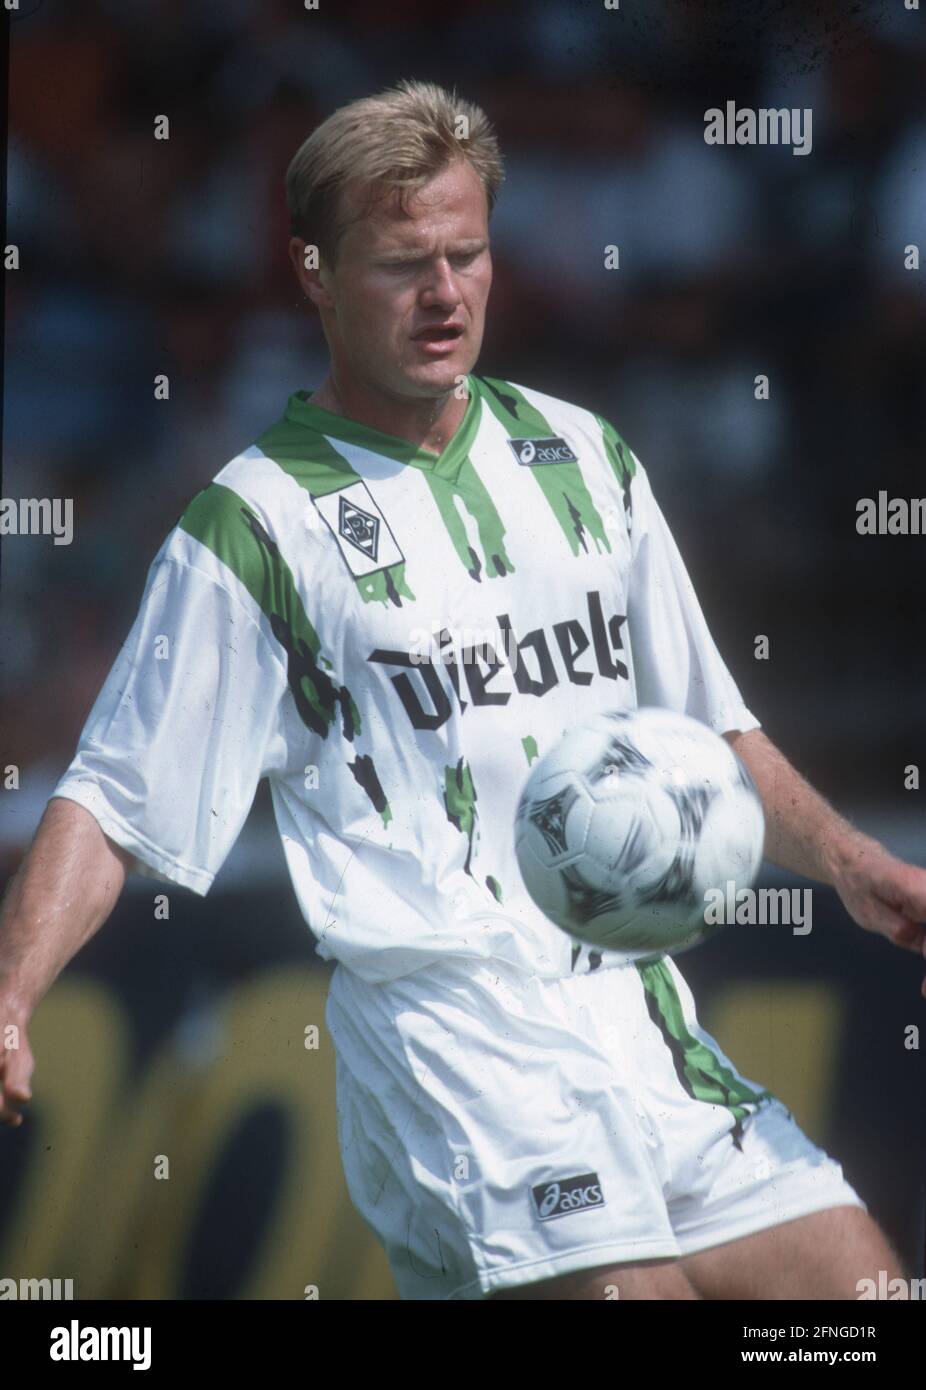 Jörg Neun / Borussia Mönchengladbach / Action 27.08.1994 (estimated). Only for journalistic use! Only for editorial use ! Copyright only for journalistic use ! Only for editorial use! [automated translation] Stock Photo